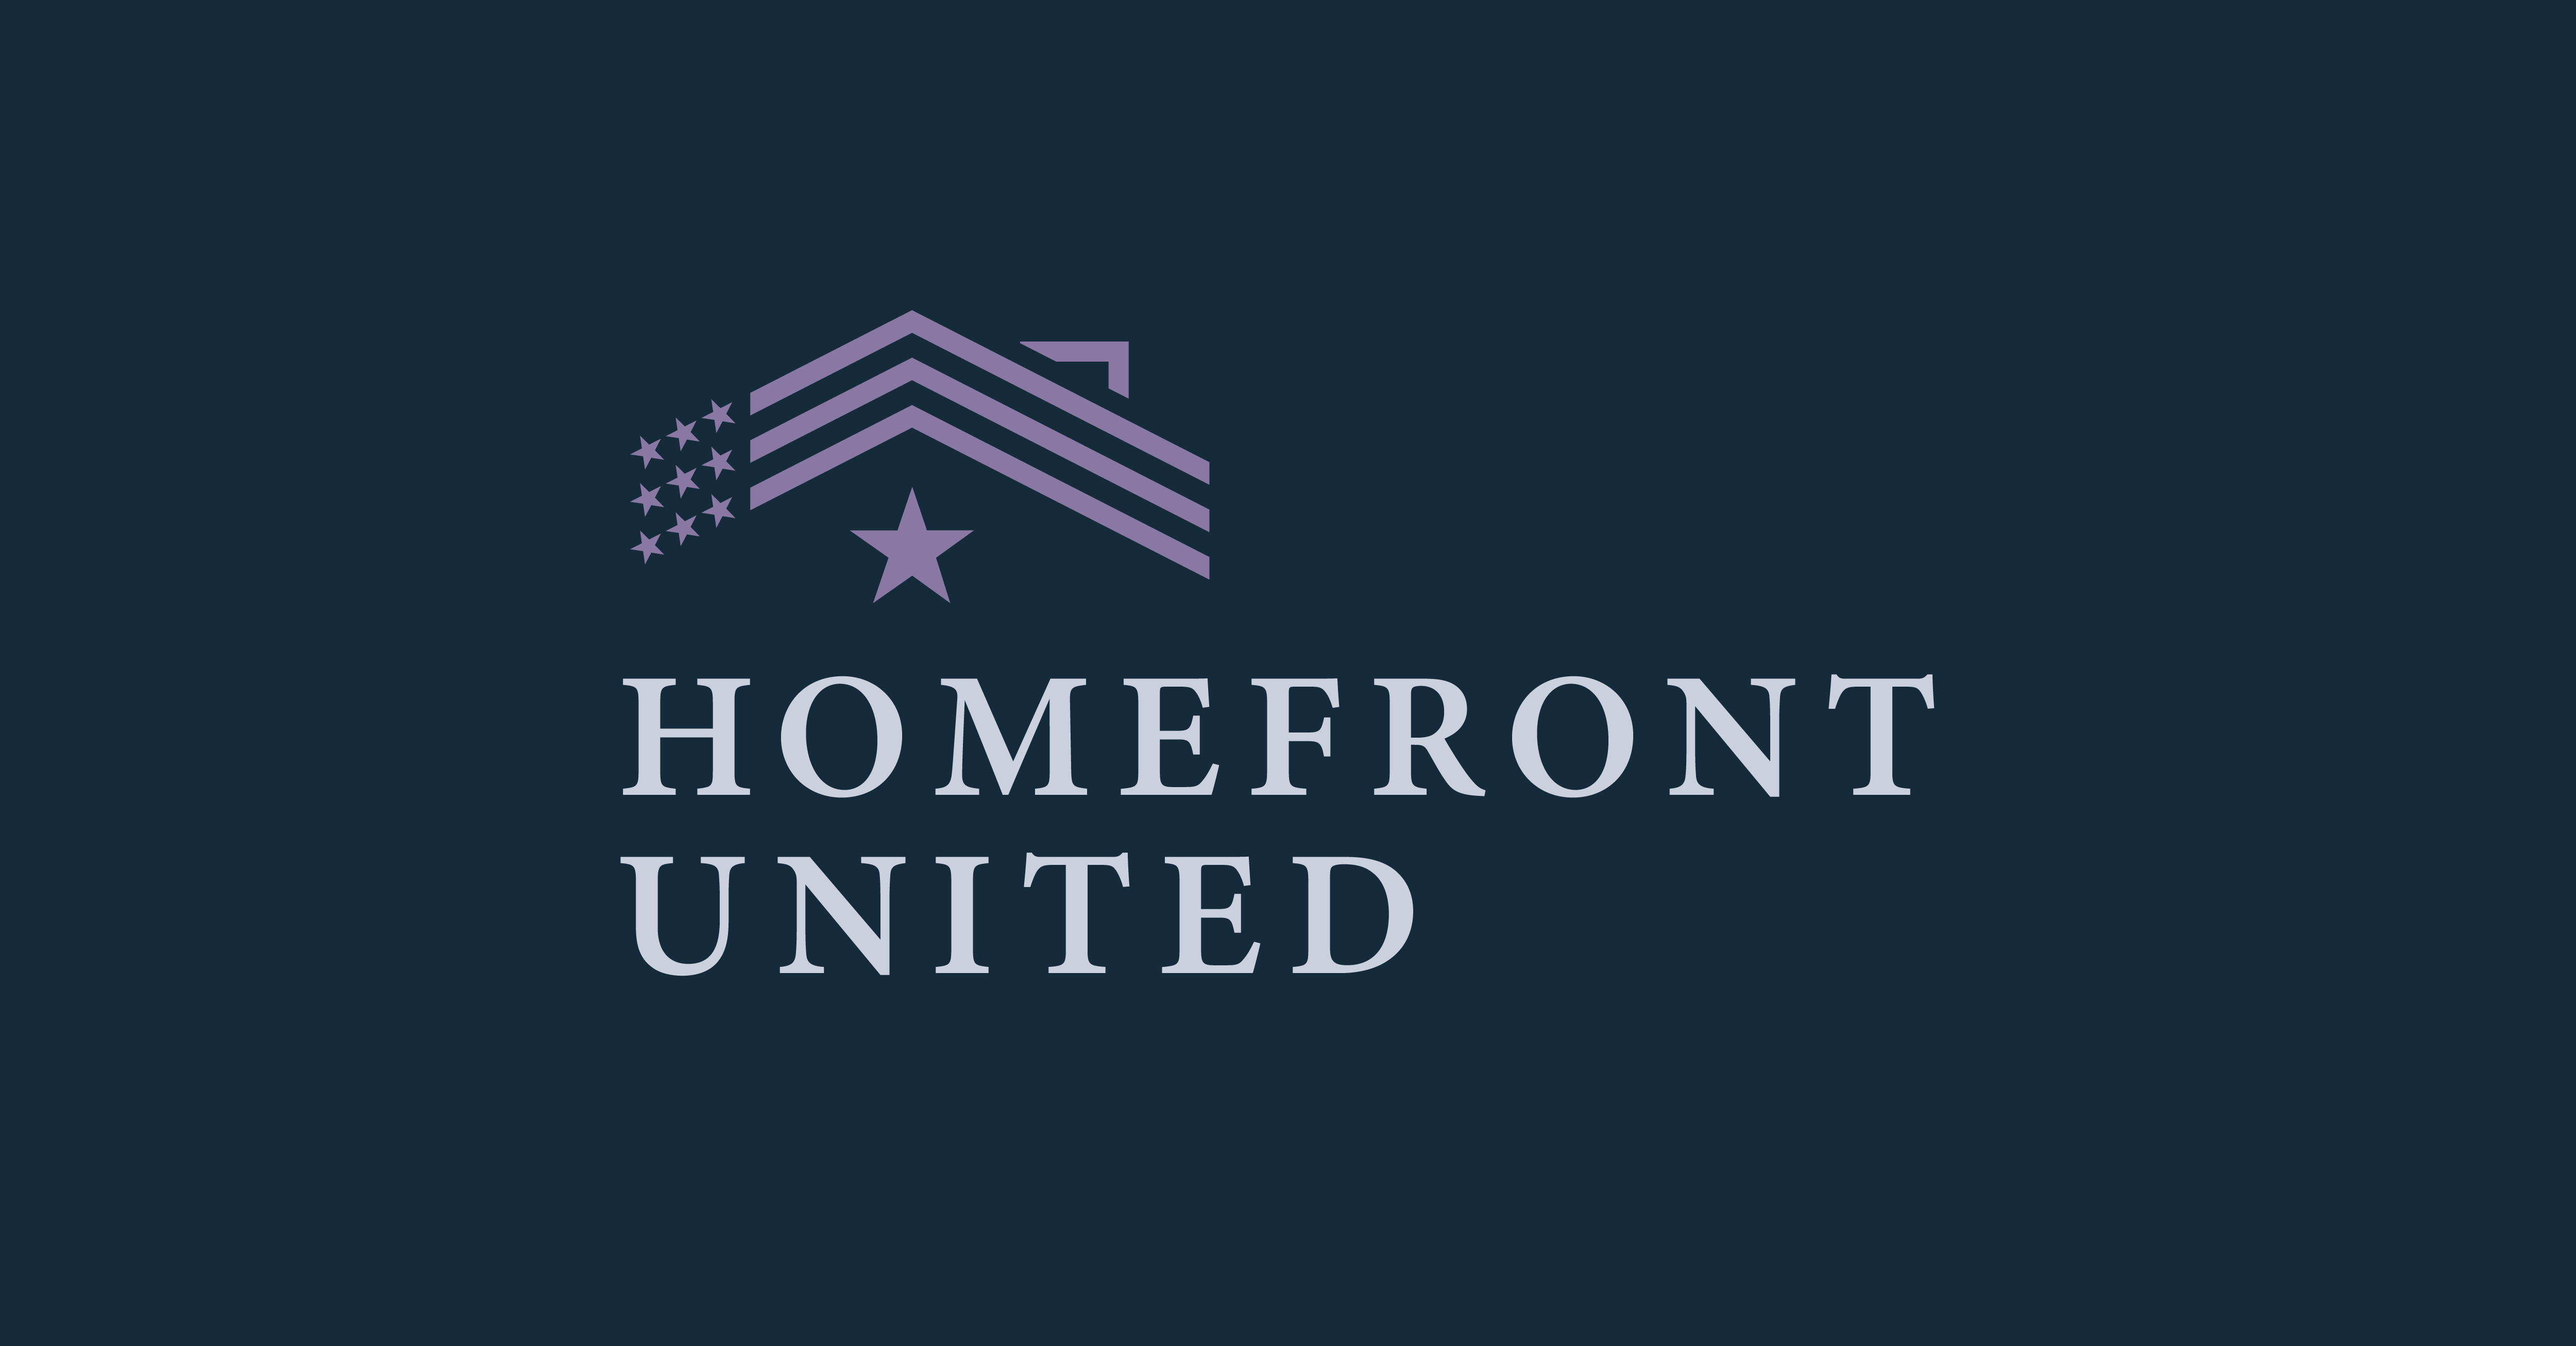 A logo consisting of a stylized rooftop with stars above and the text "Homefront United" below, all against a dark blue background.